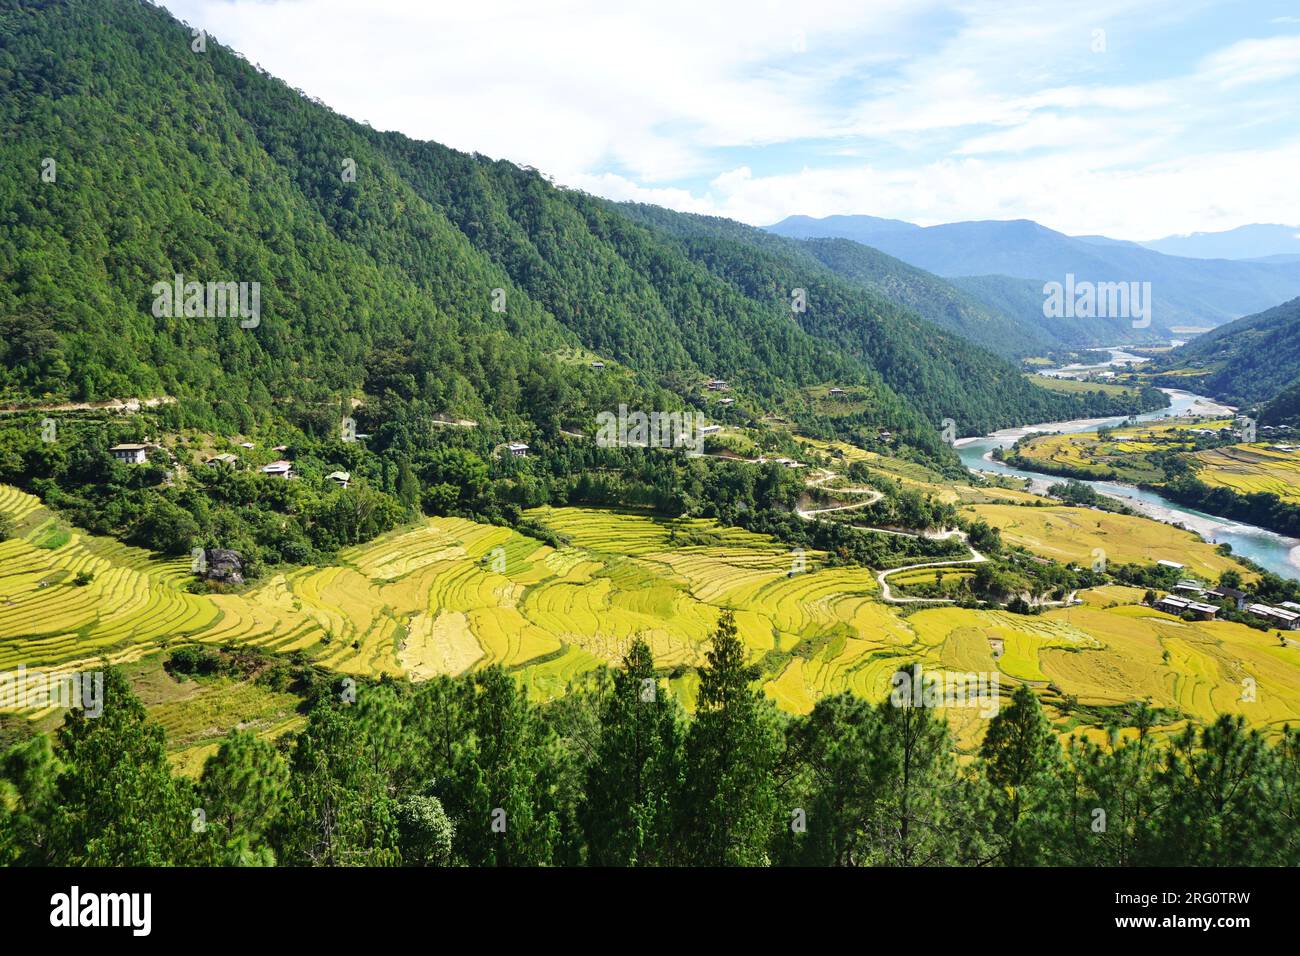 Scenic view of a valley in rural Bhutan with pale green terraced rice fields, forested mountainsides and a winding river snaking into the distance Stock Photo